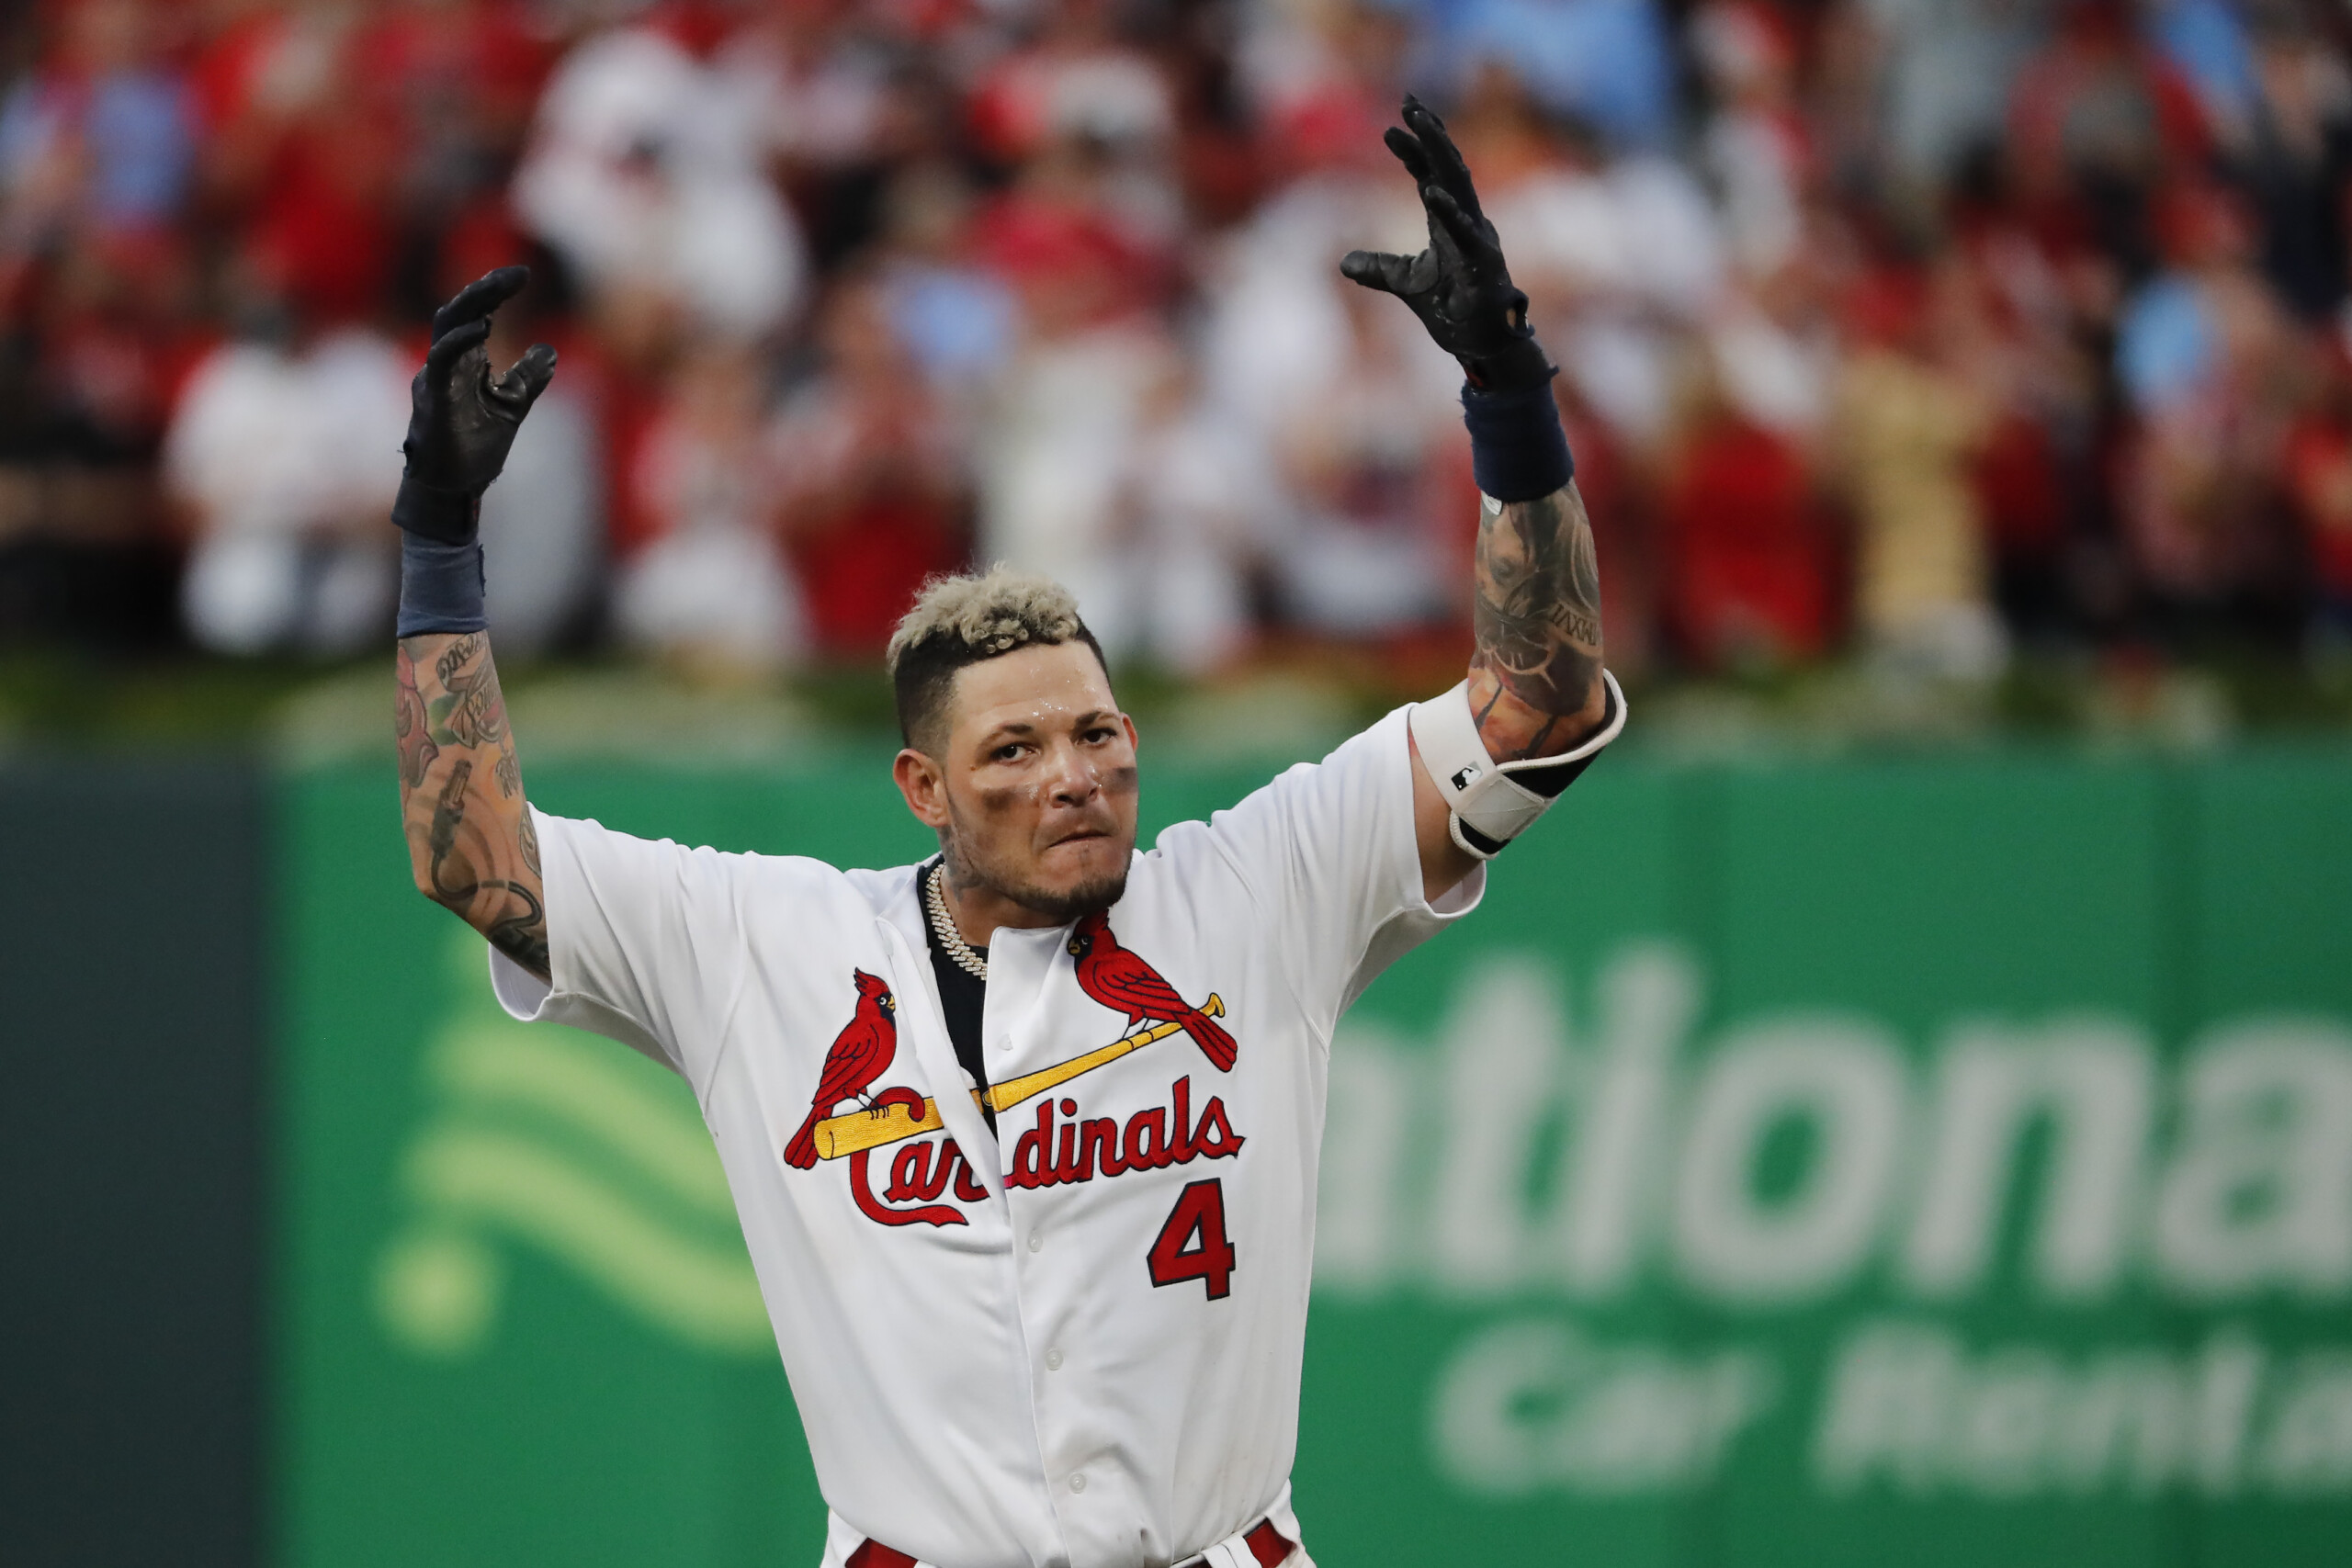 ATTENTION Yadier Molina wants and sounds like manager of the scaled